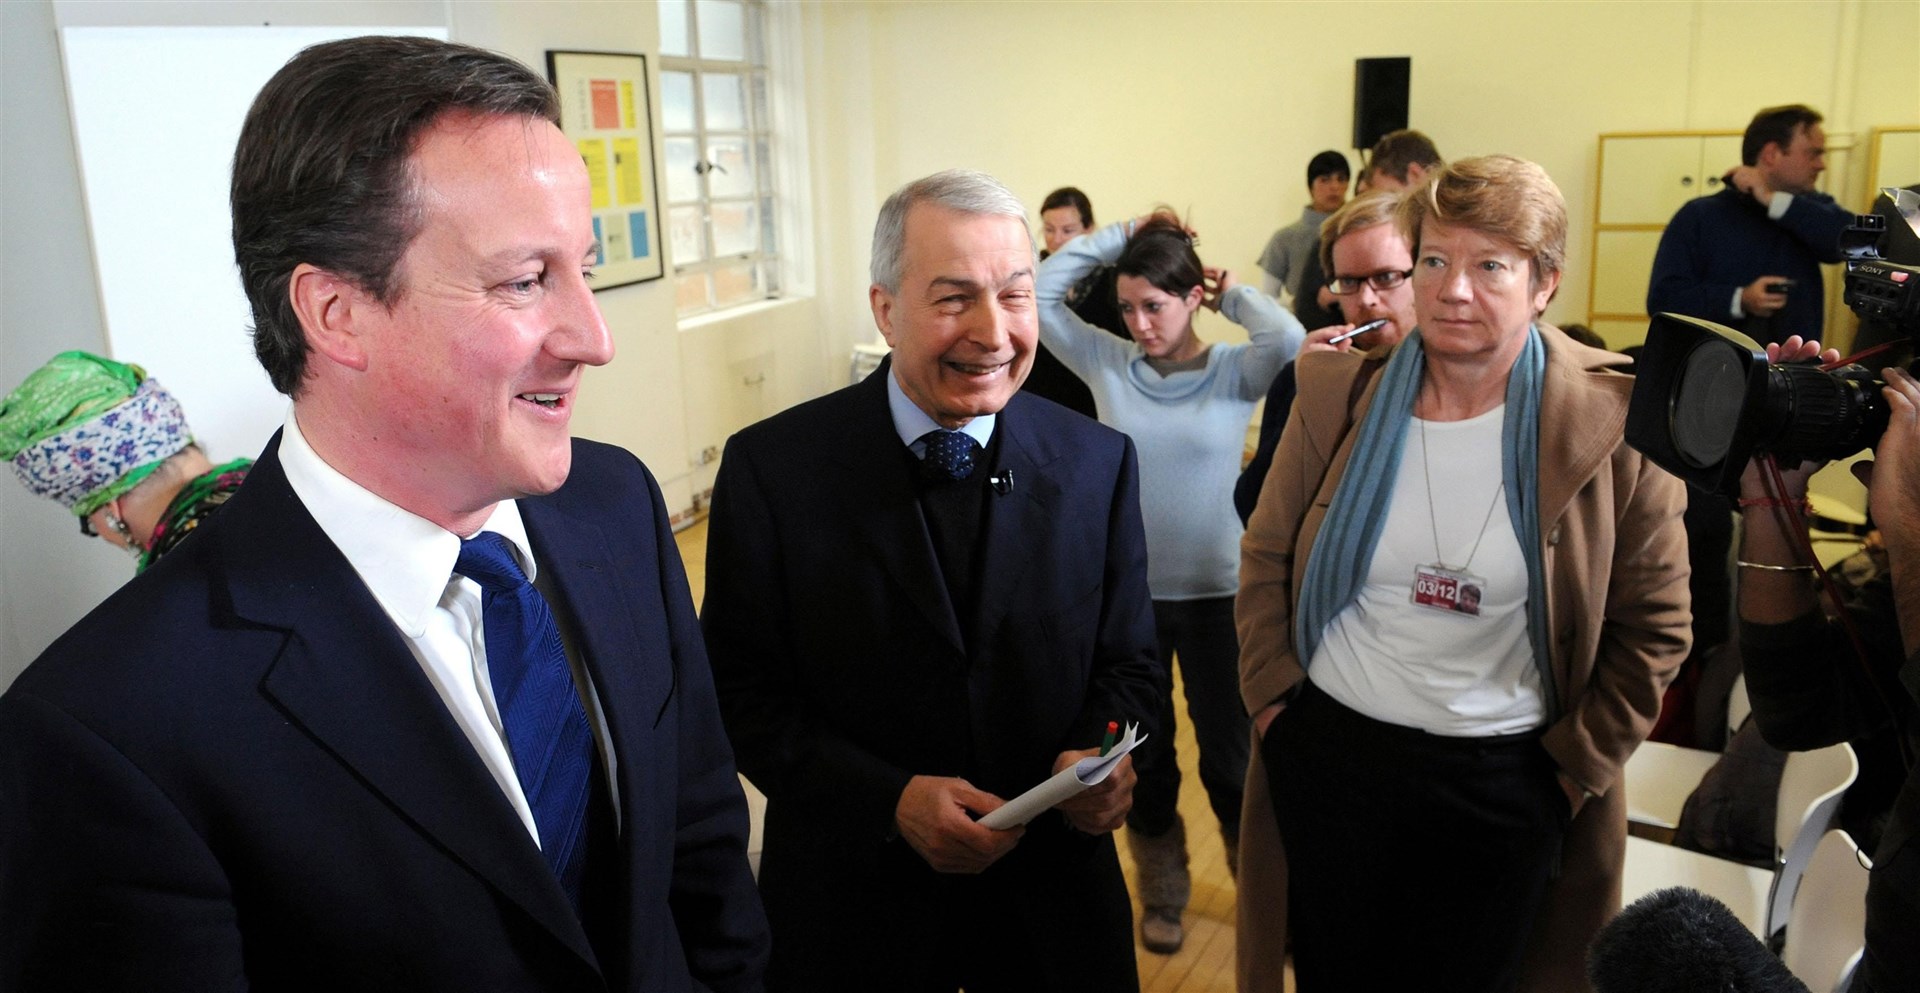 Frank Field with David Cameron who appointed him to head an independent review into poverty (Fiona Hanson/PA)